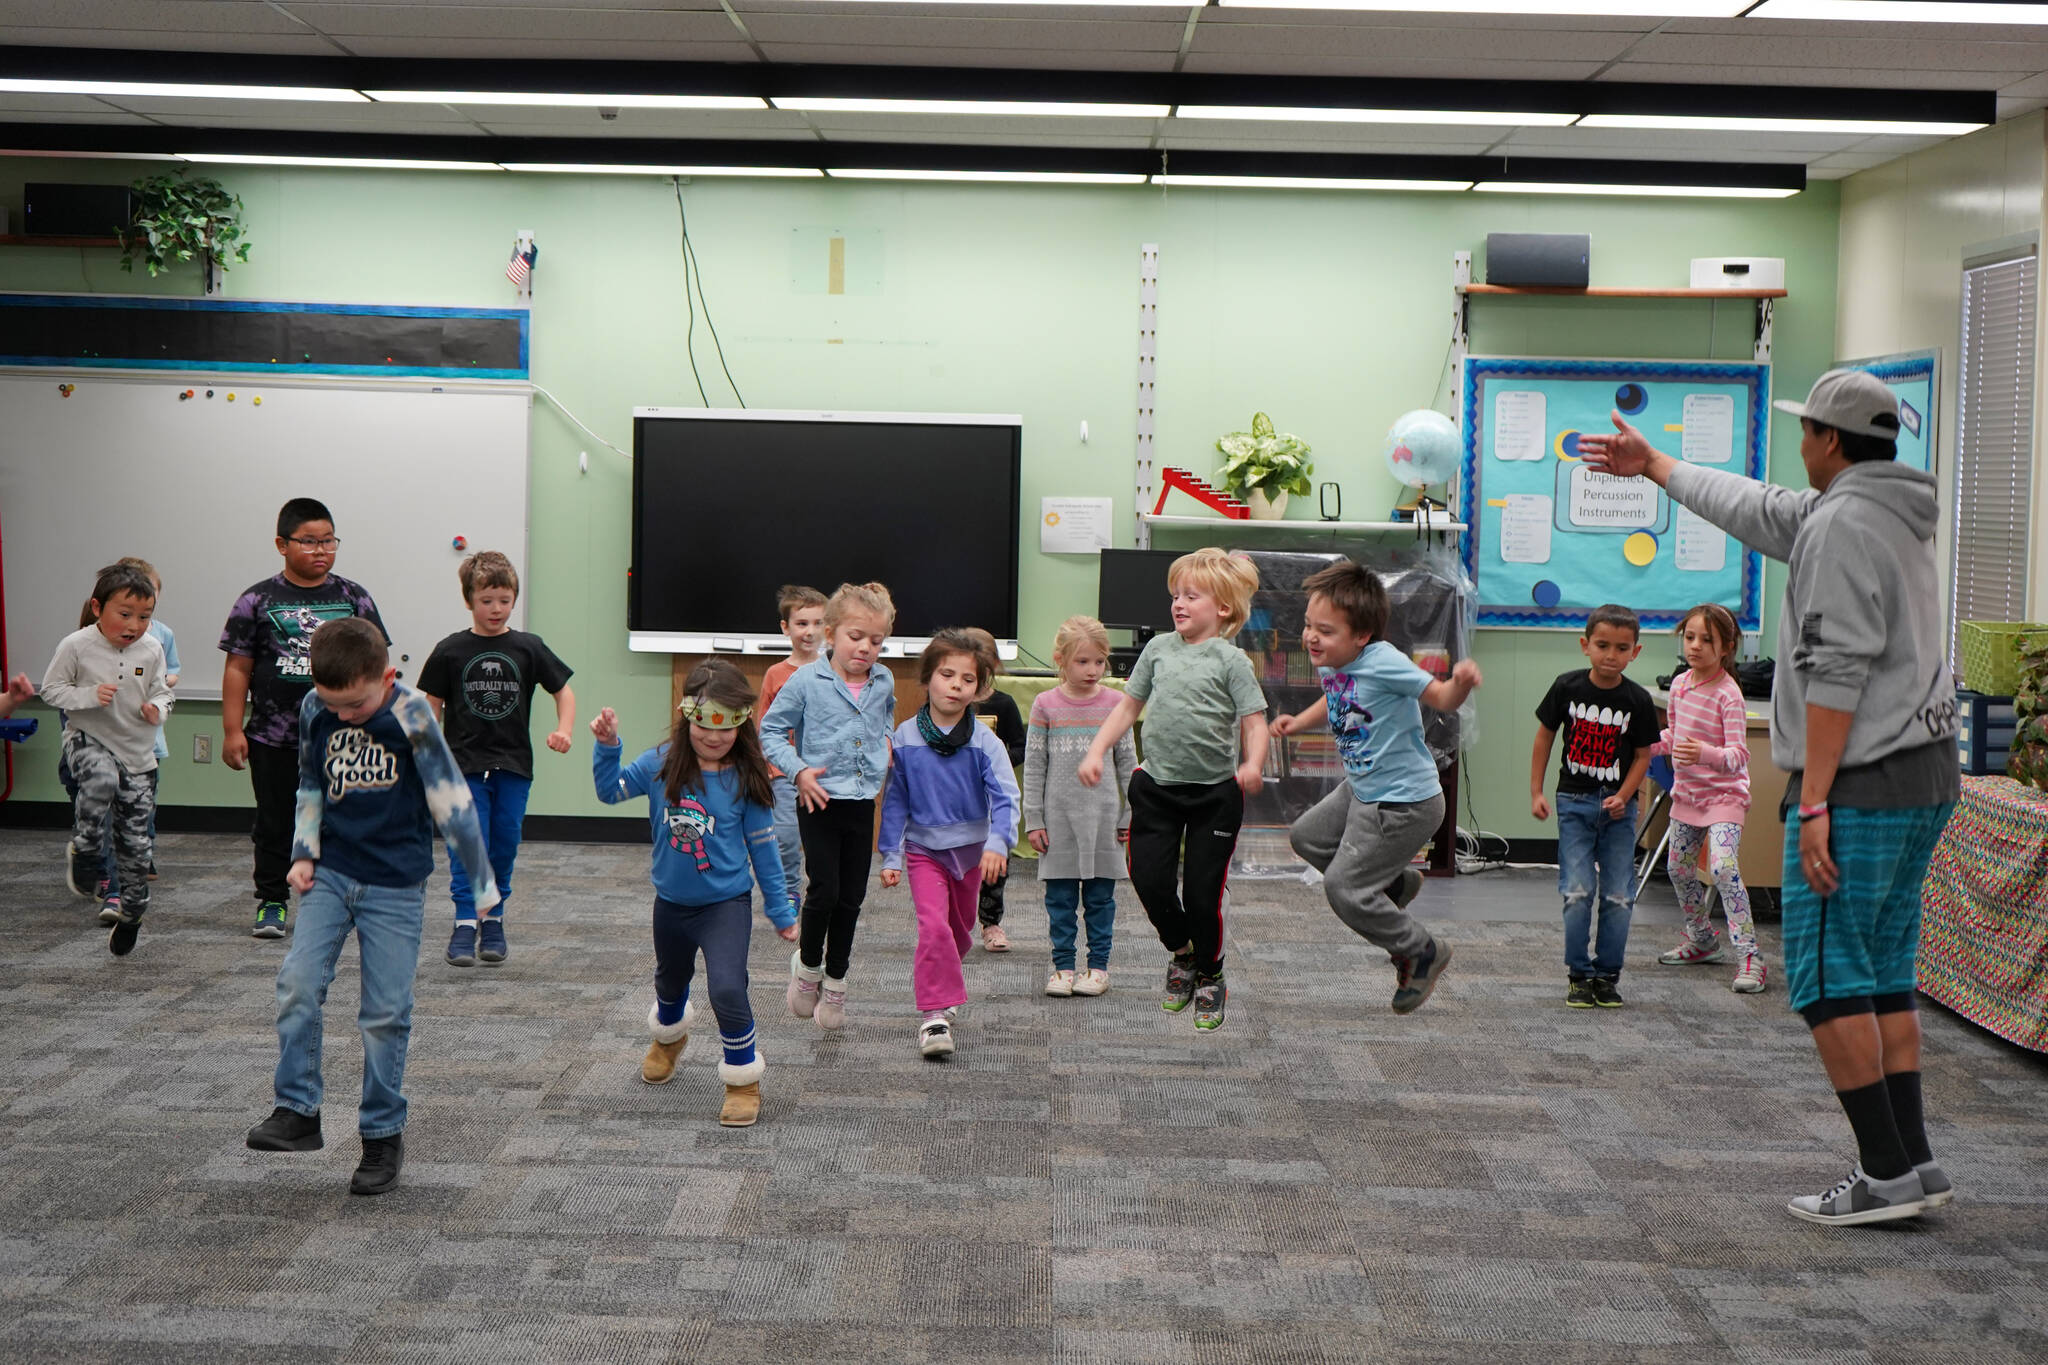 Jessie Soyangco, right, leads a class of kindergarteners in dancing to a remix of the “Little Einstein’s” theme song at Kaleidoscope School of Arts and Science in Kenai, Alaska, on Thursday, Oct. 19, 2023. (Jake Dye/Peninsula Clarion)